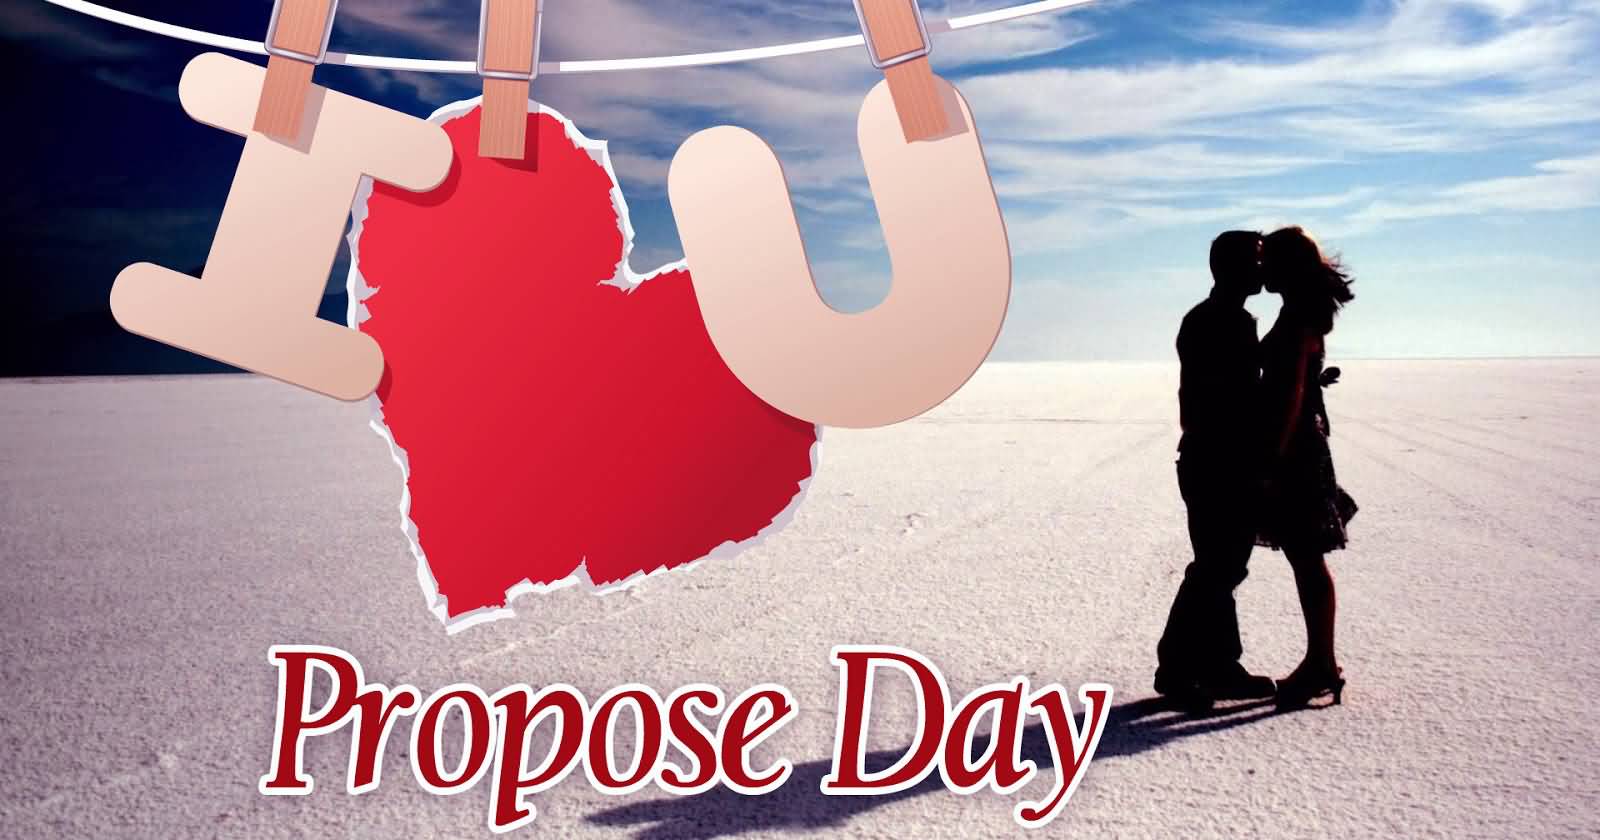 I Love You Propose Day Wishes